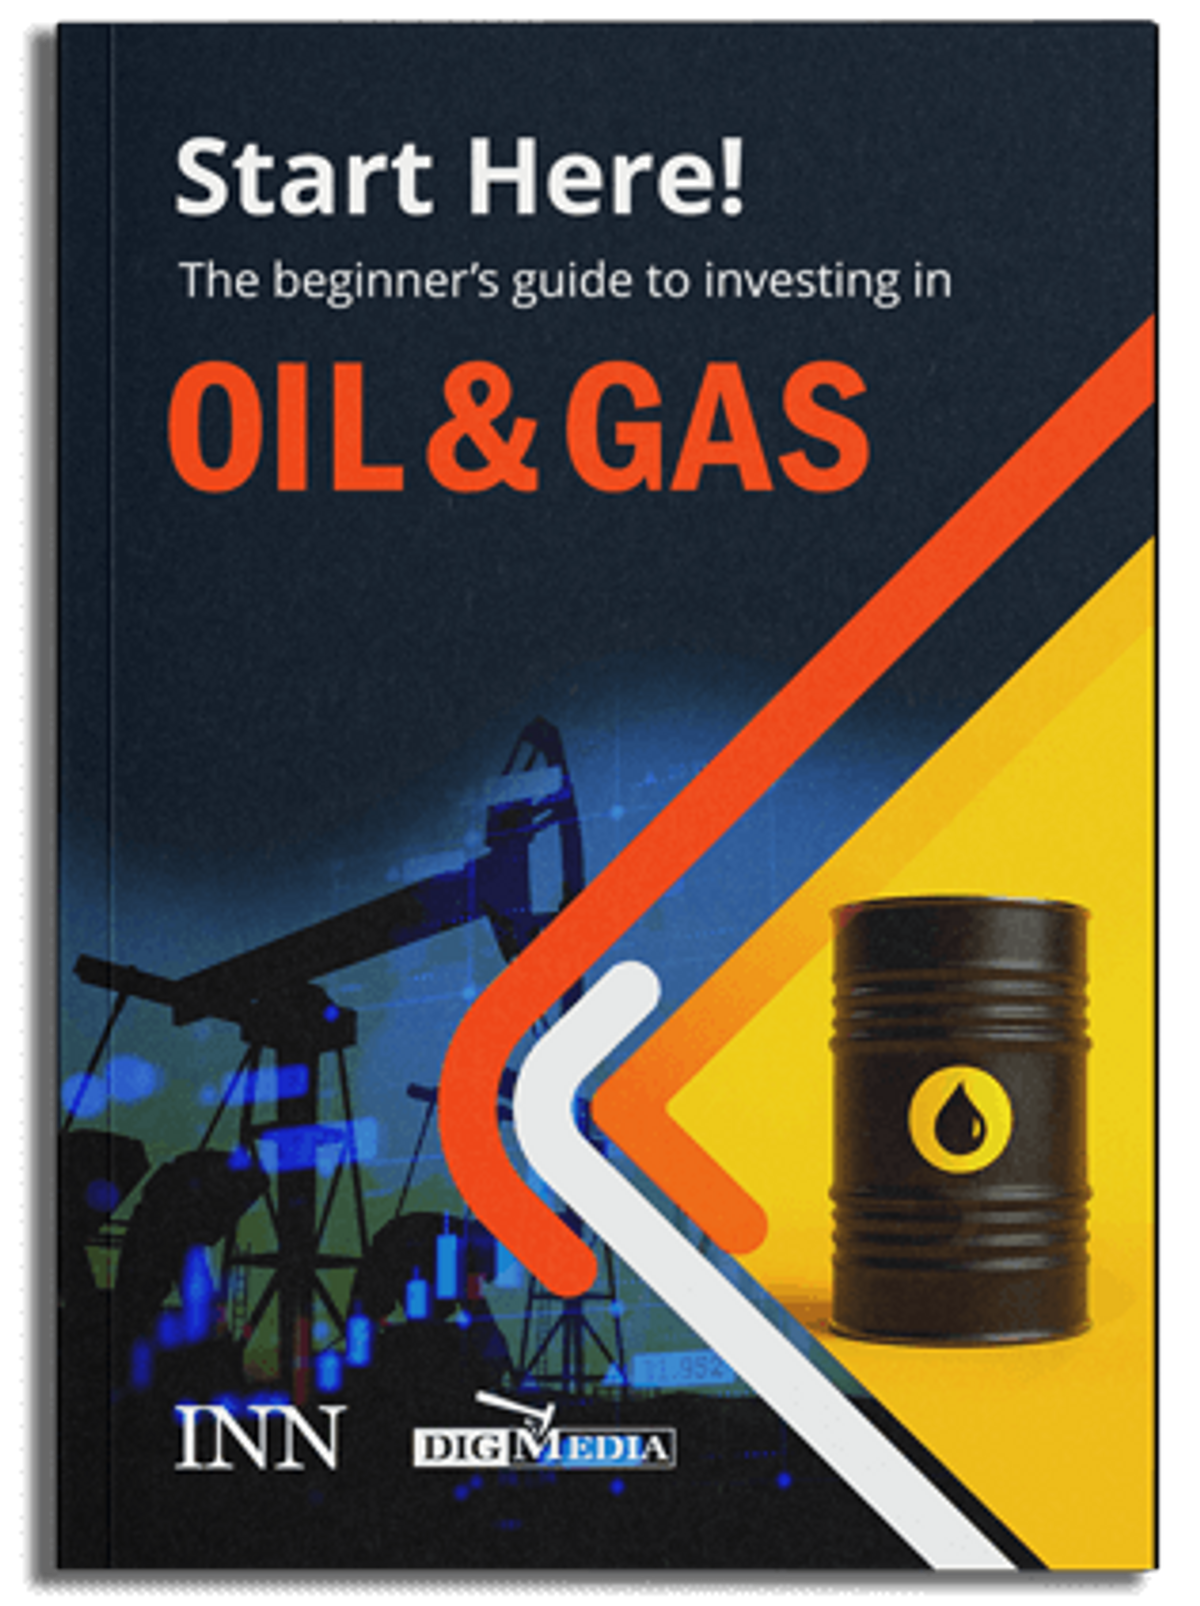 The Beginner's Guide to Investing In Oil & Gas